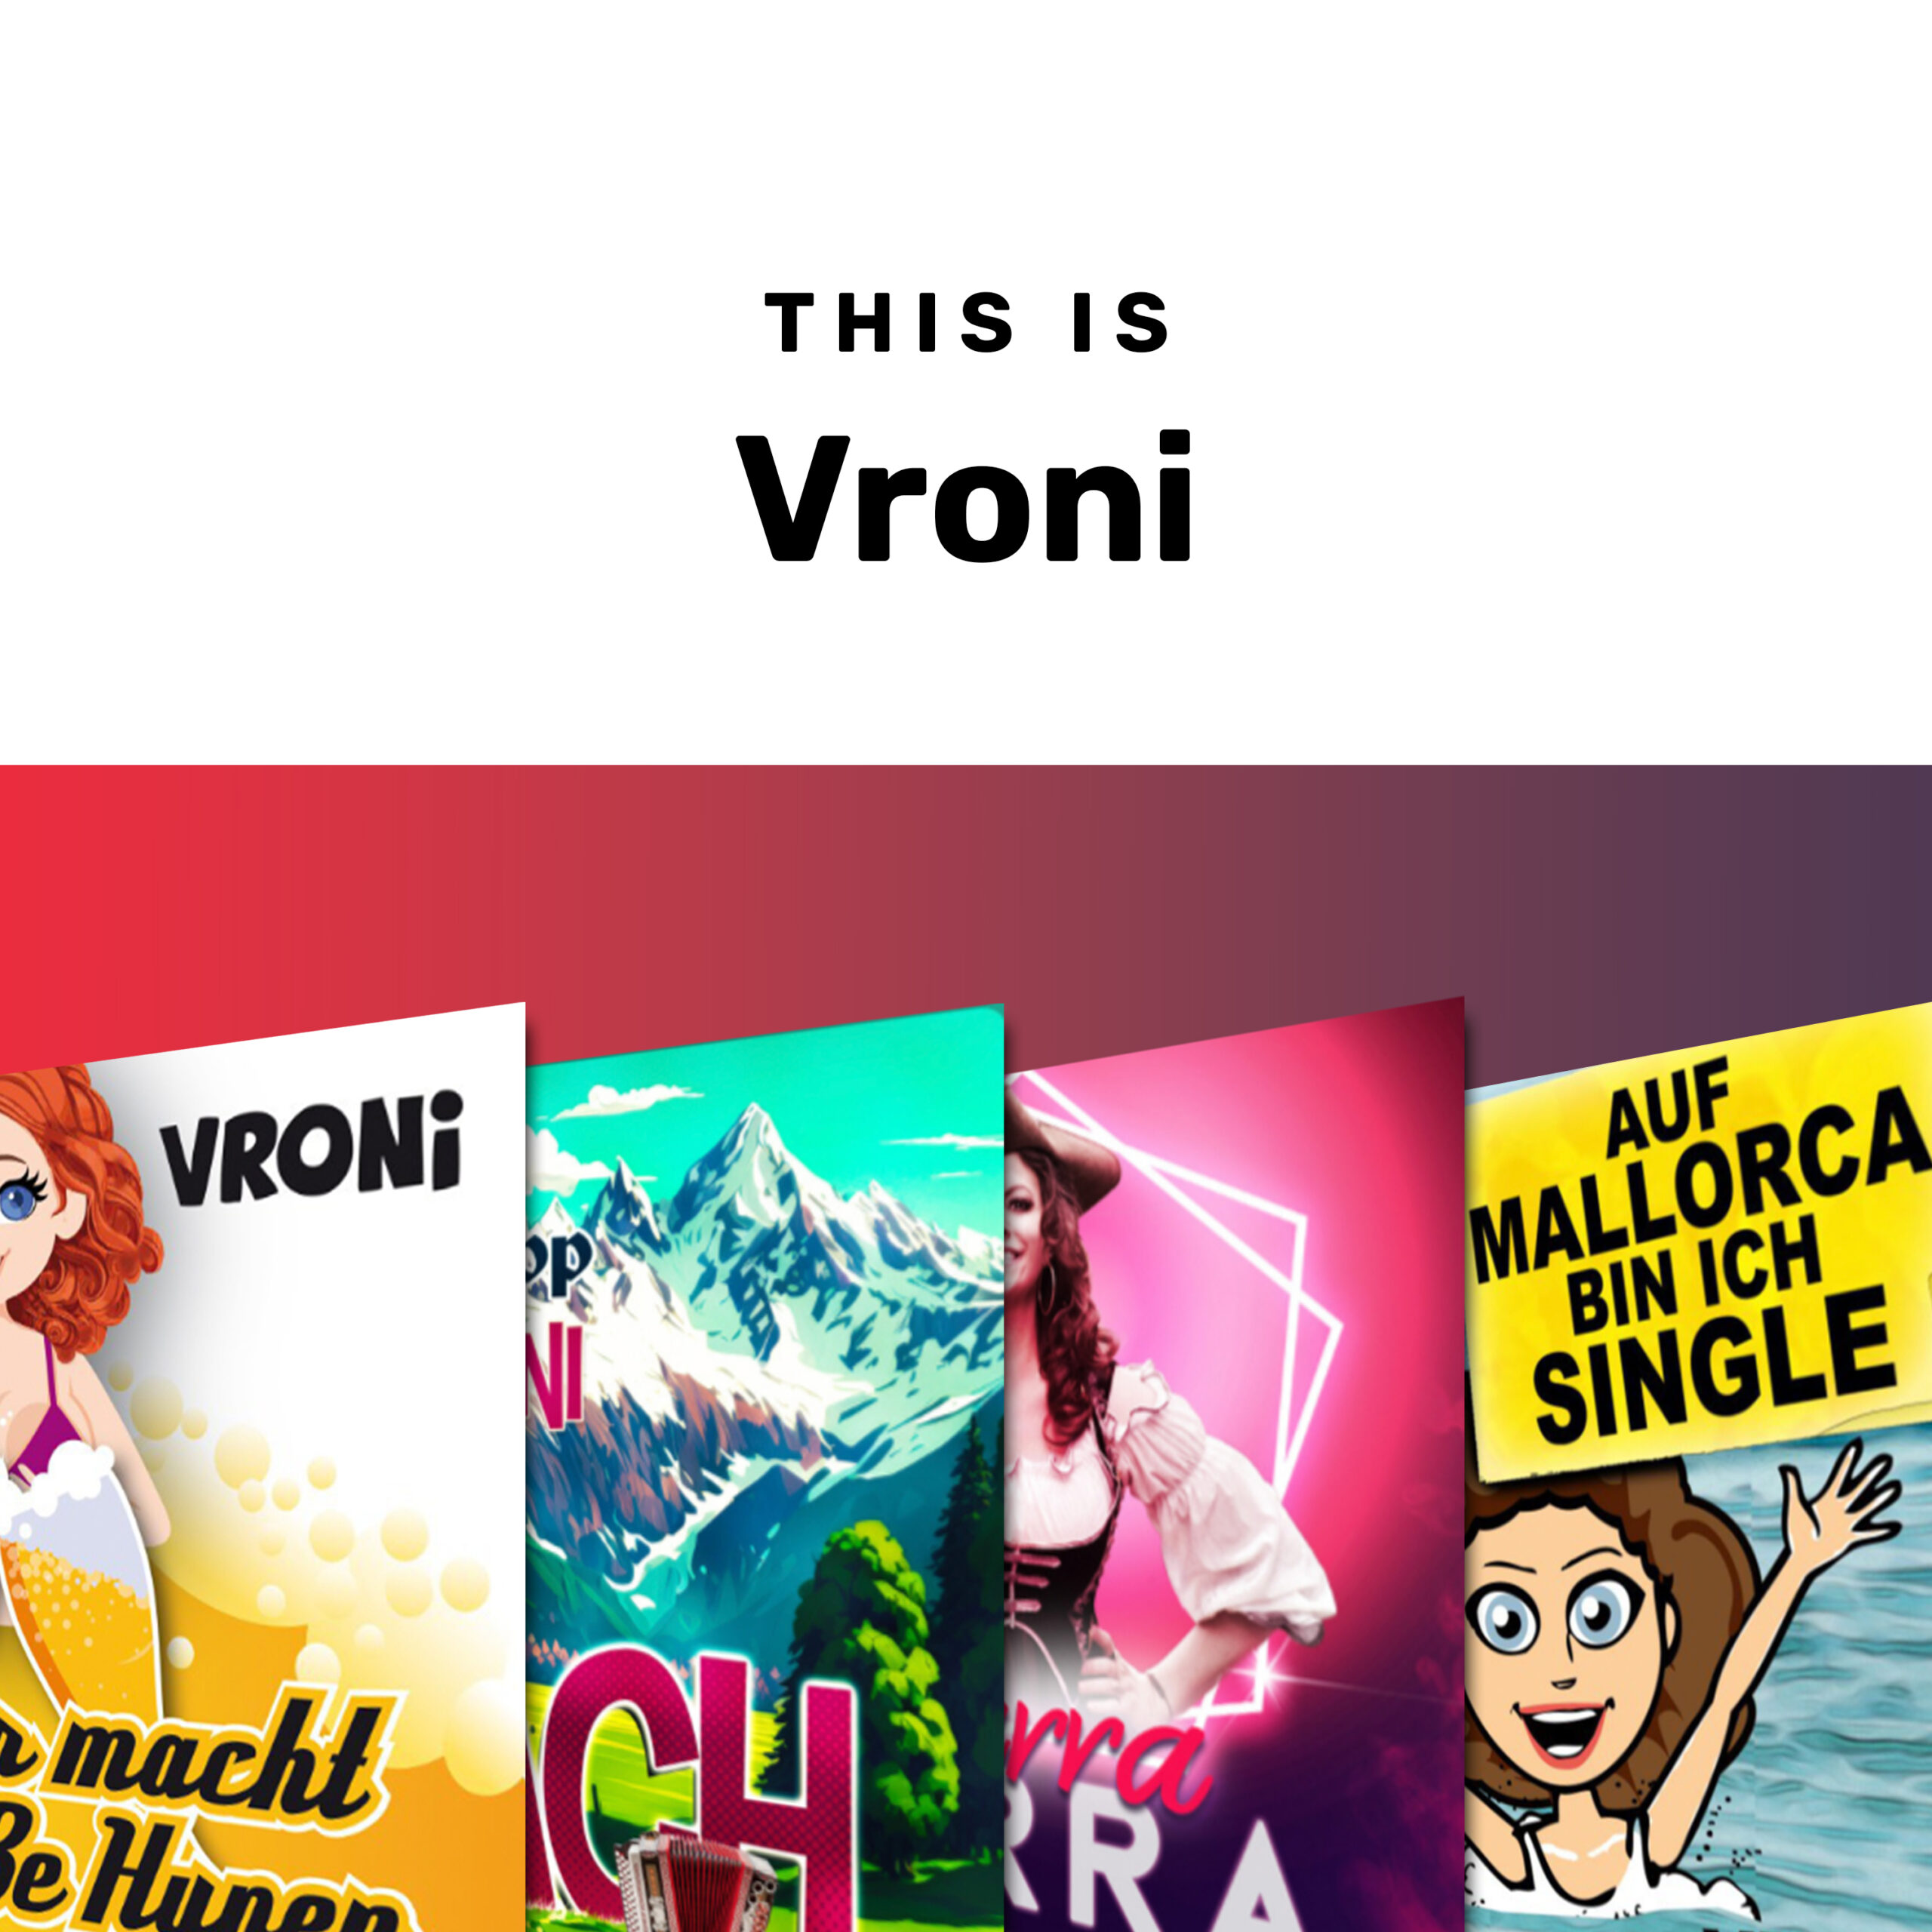 This is Vroni